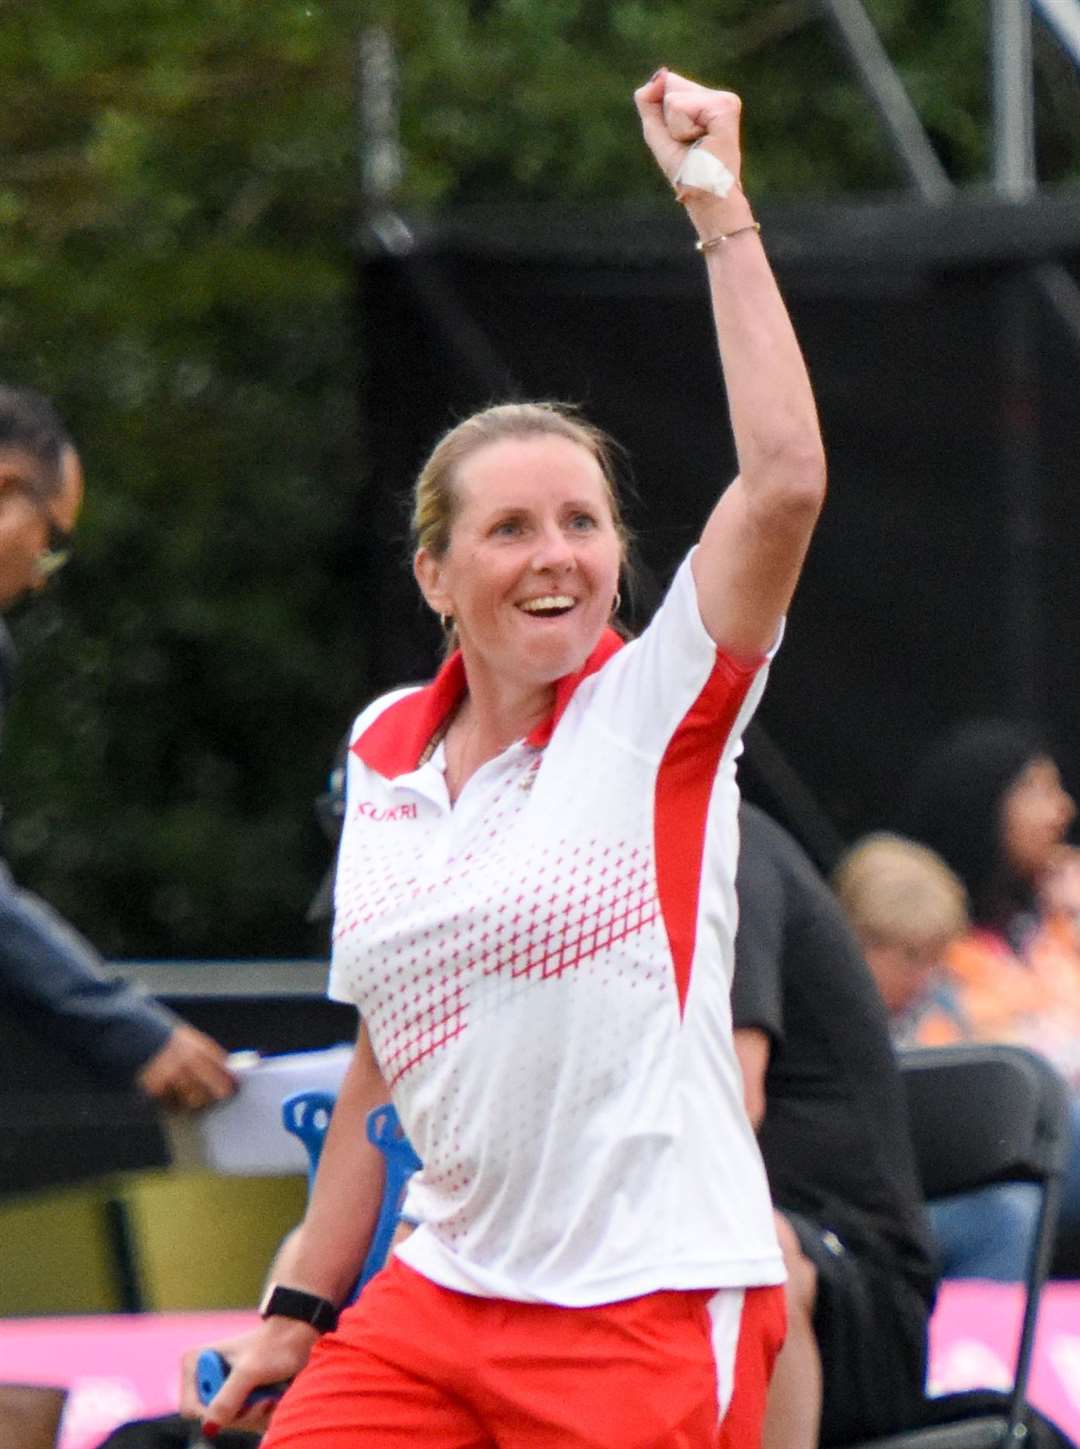 Dartford's Michelle White is all smiles at the Commonwealth Games. Picture: Team England